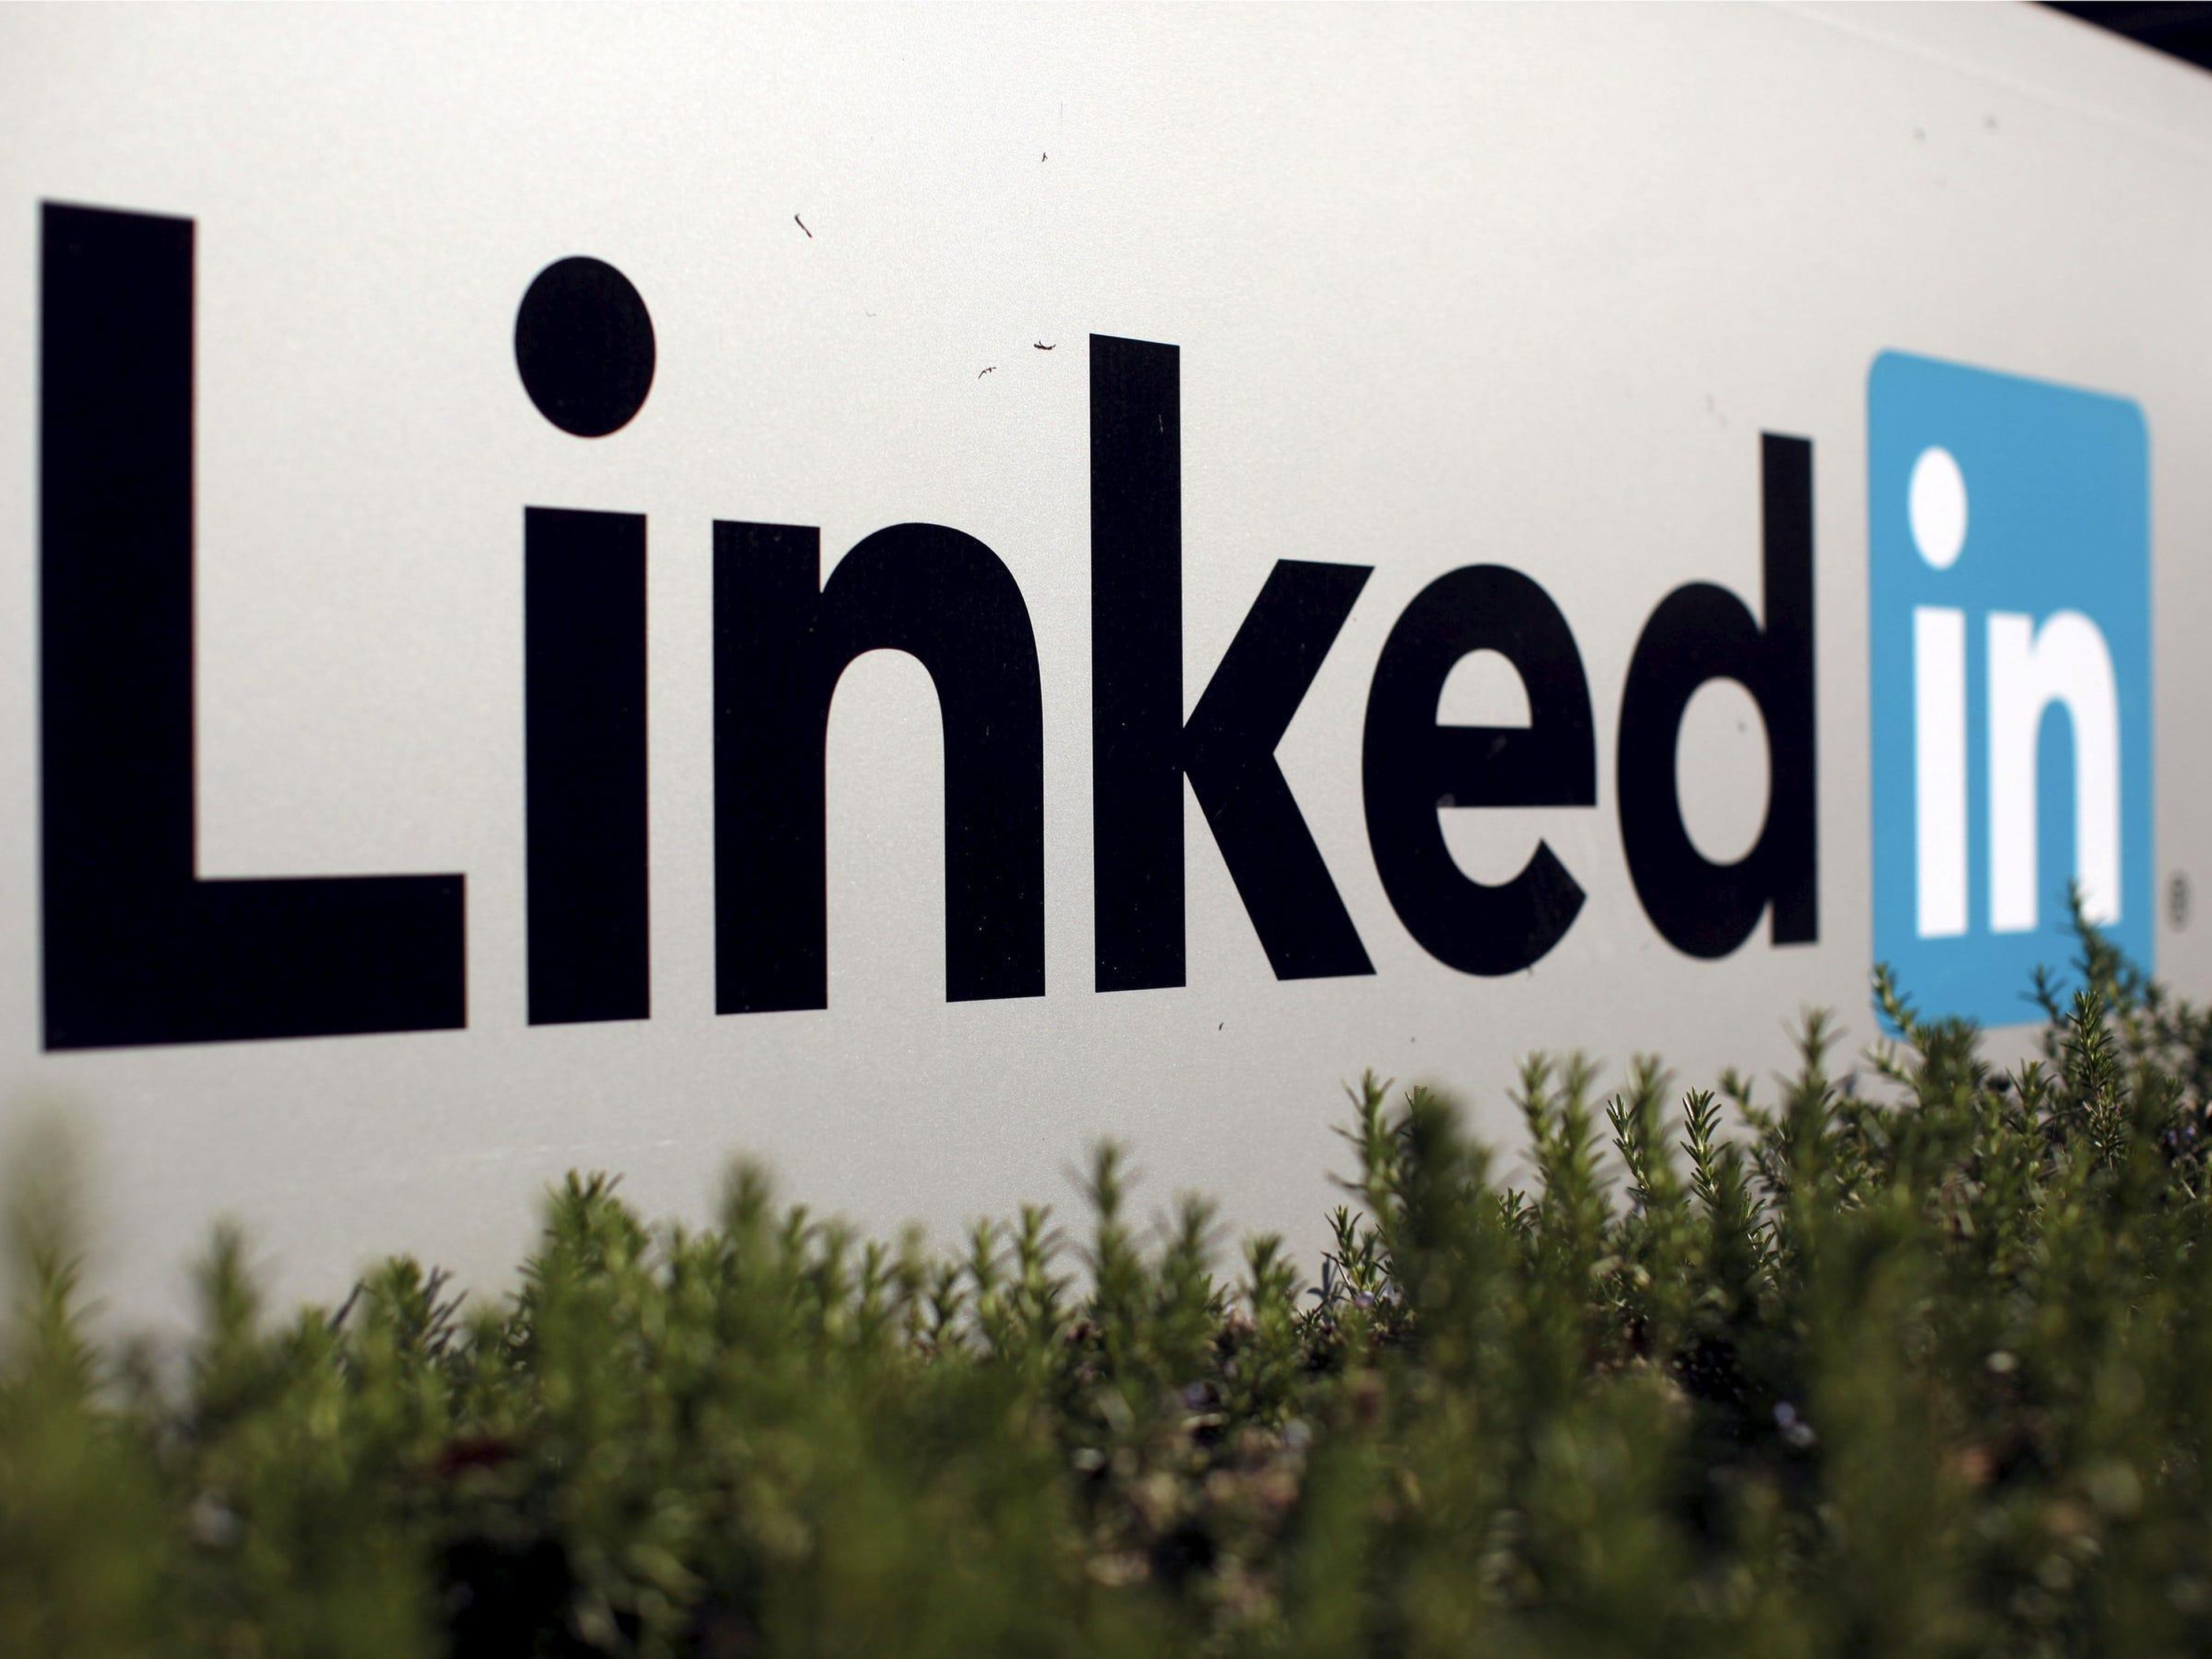 May 2012: LinkedIn is hacked, and the personal data of 117 million people is shared on the dark web.